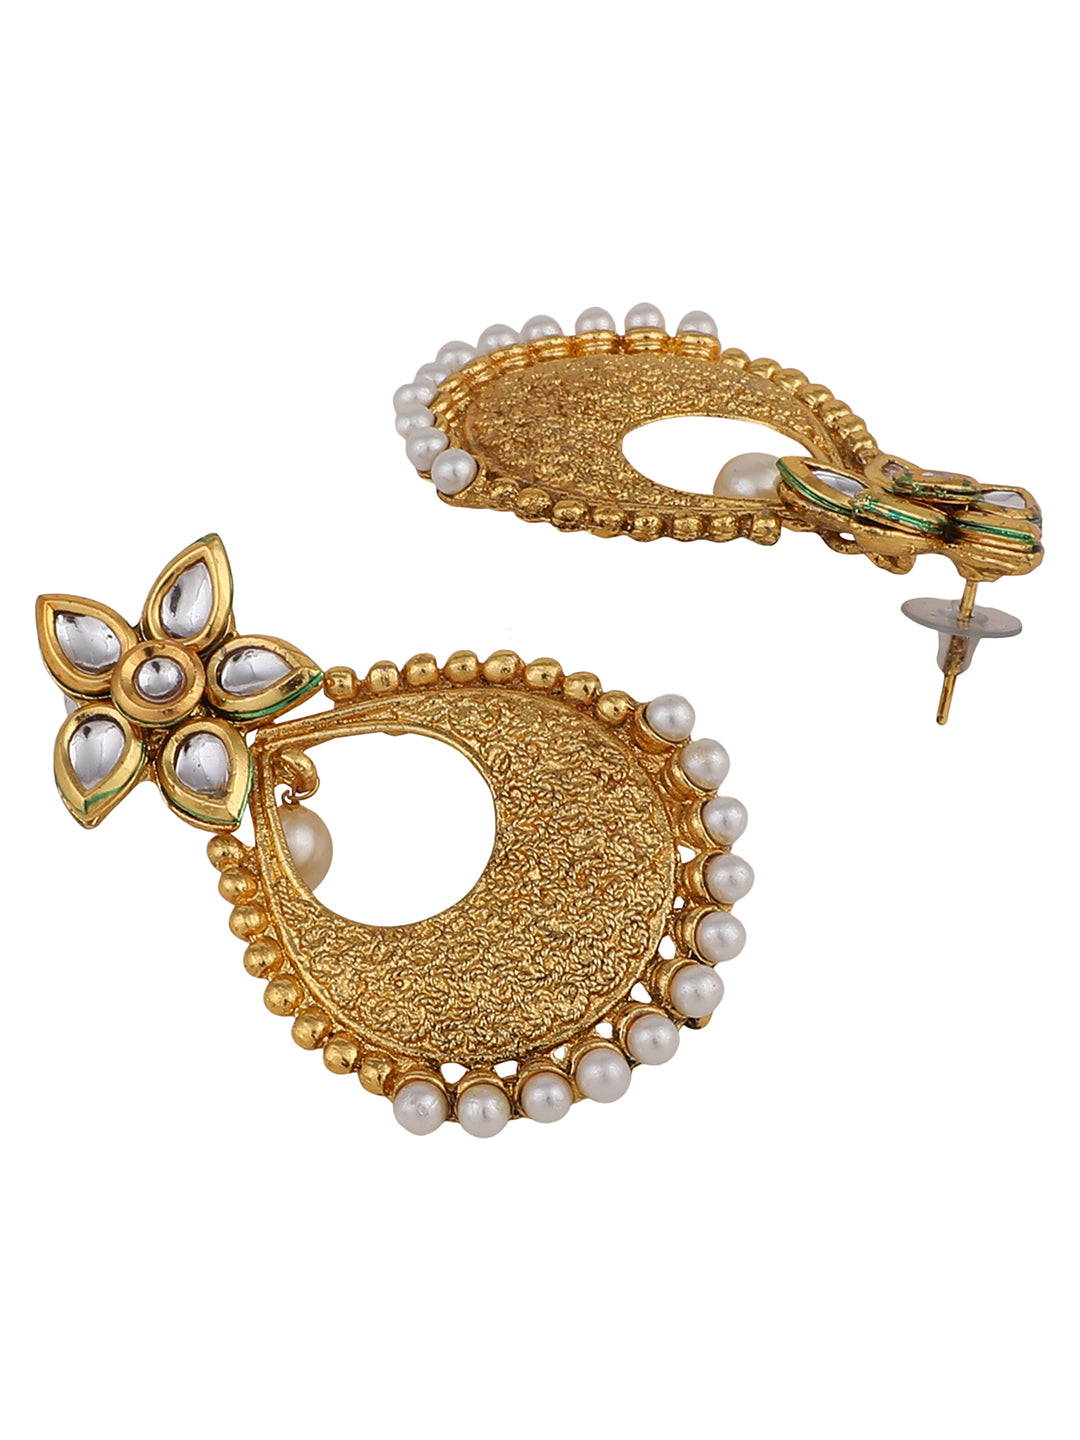 Women's Gold Plated and Selfdesign Traditional Stone and pearl Chandbali Earring - Anikas Creation